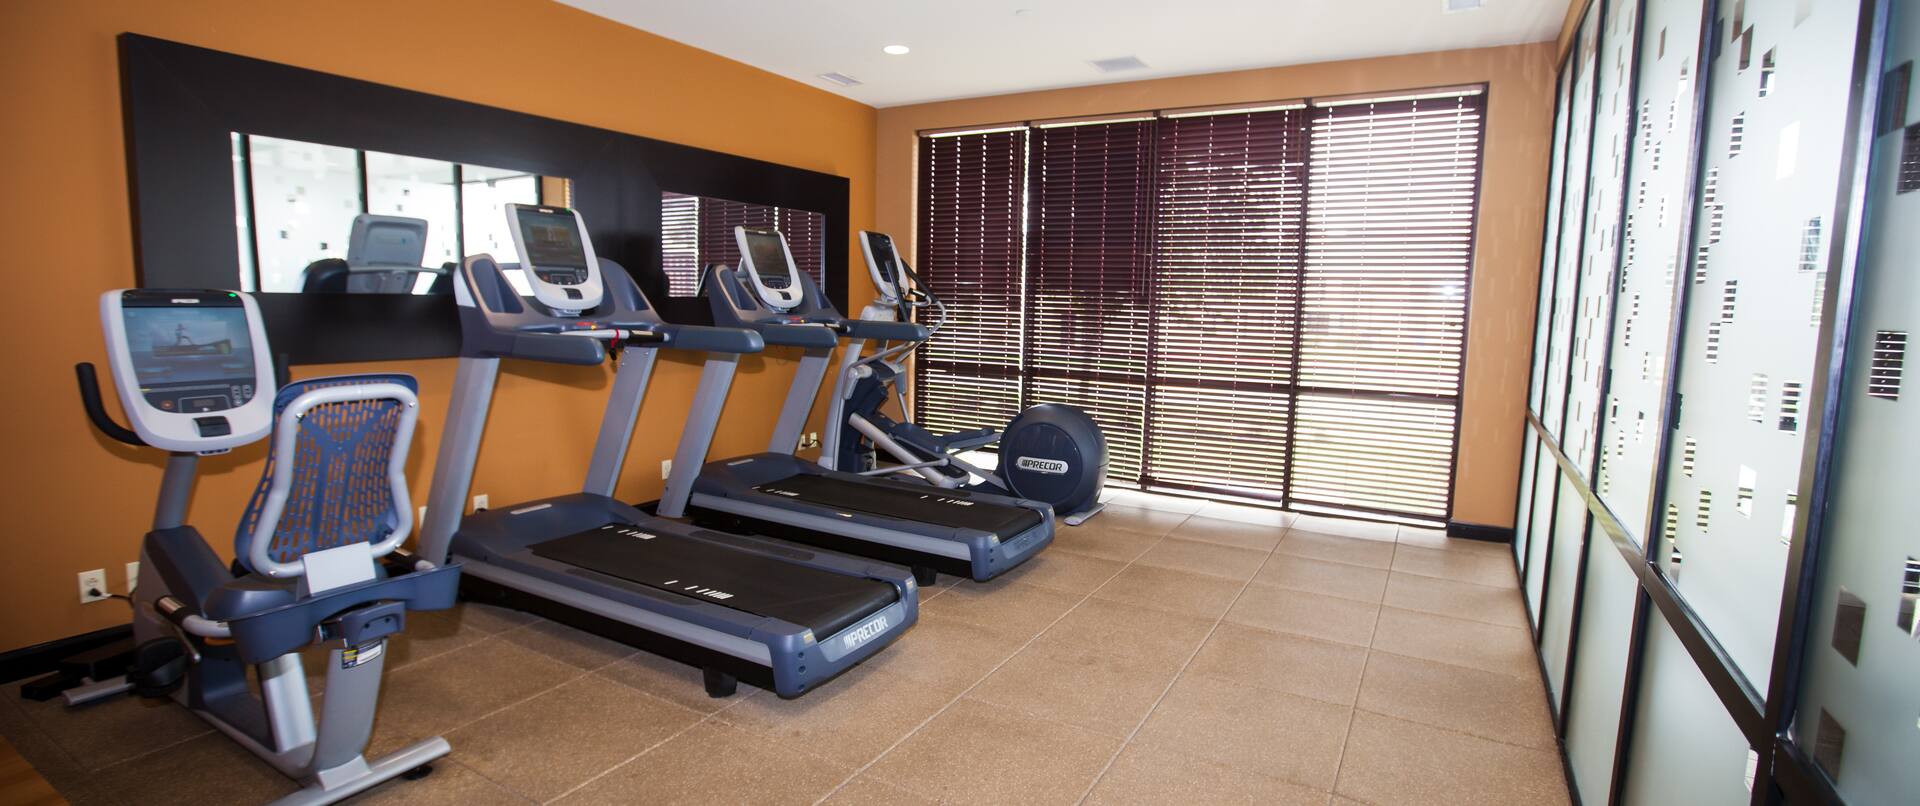 Cardio Equipment in Fitness Center With Large Windows